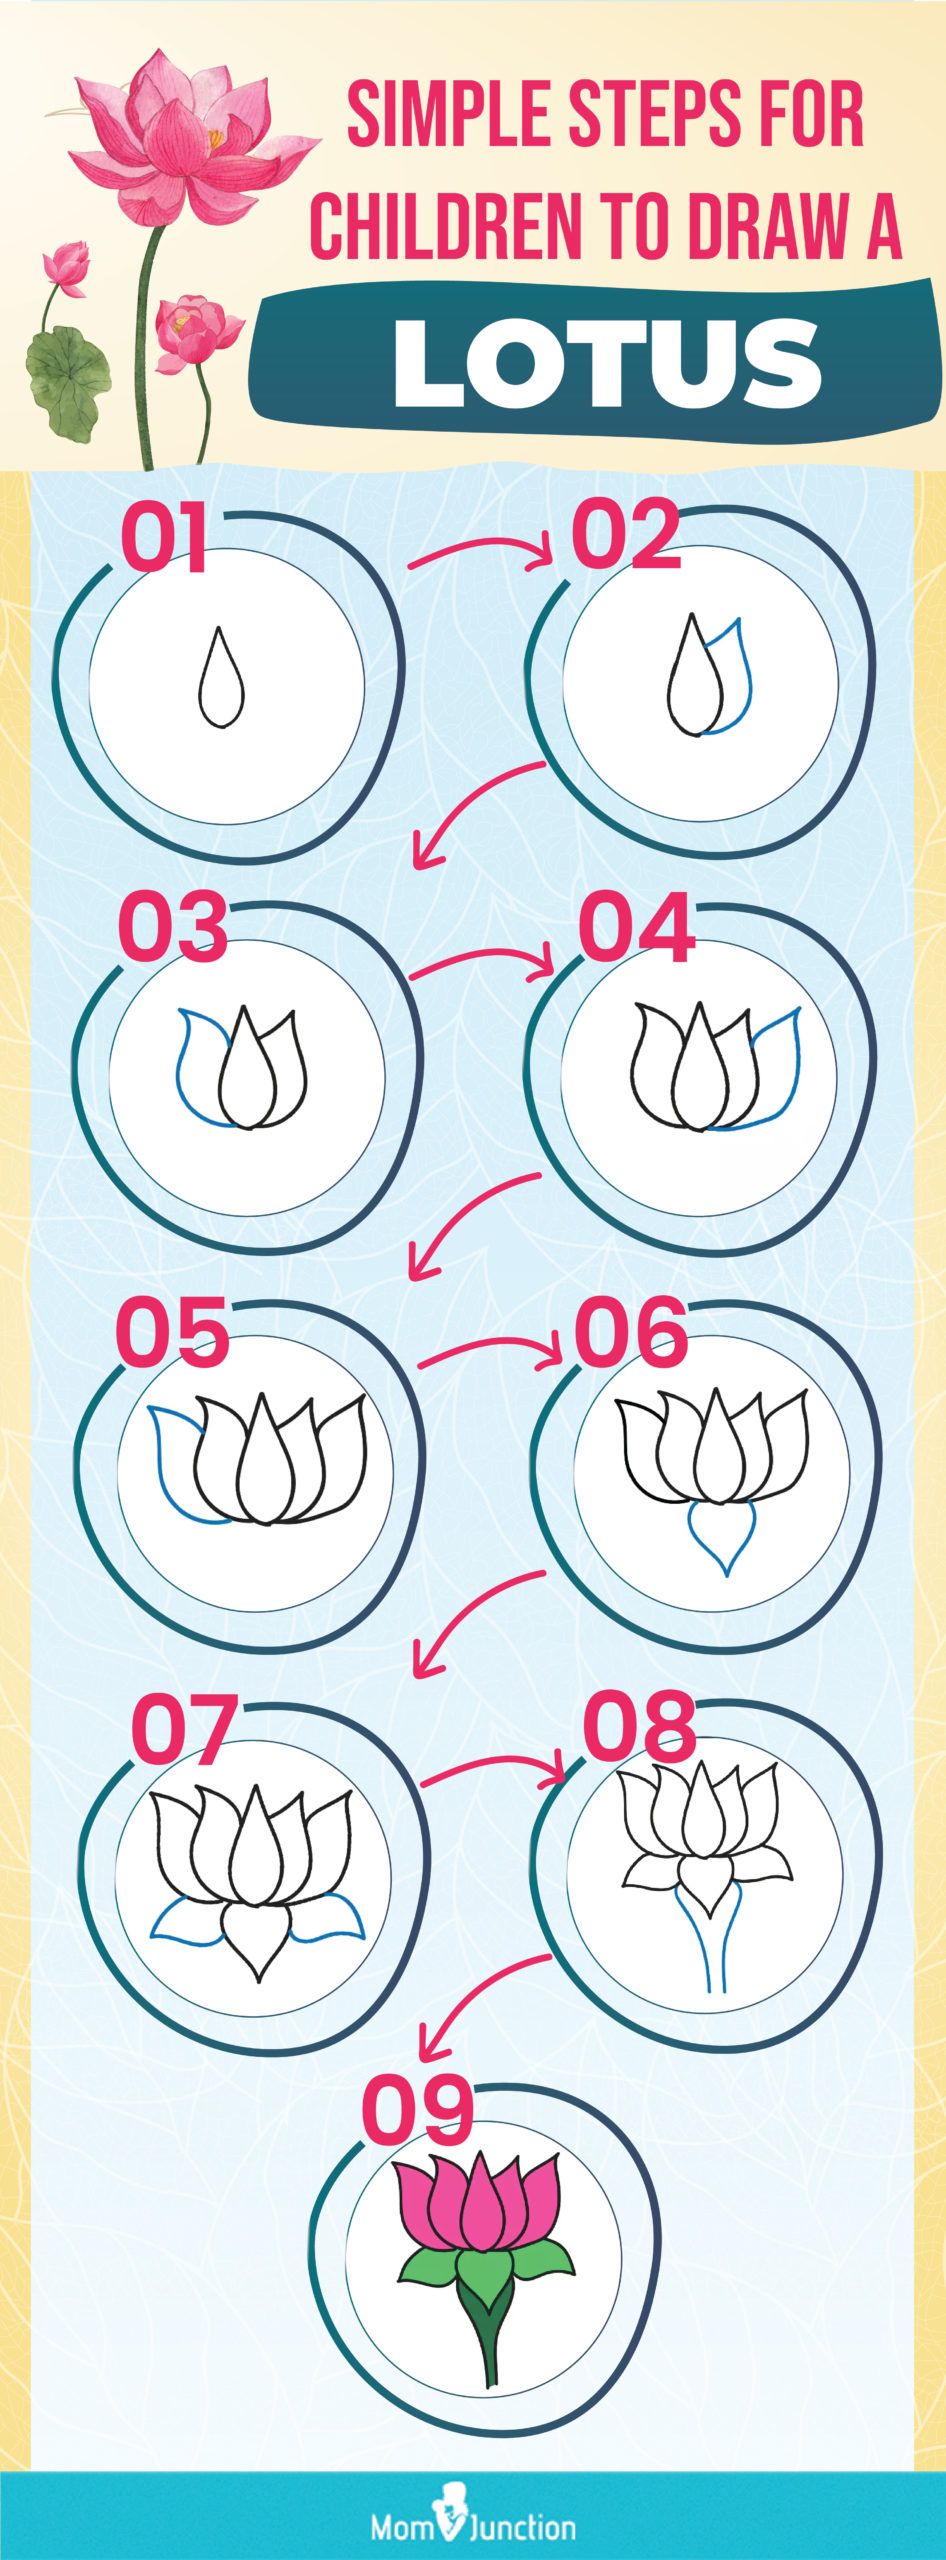 easy instructions to draw a lotus for children (infographic)